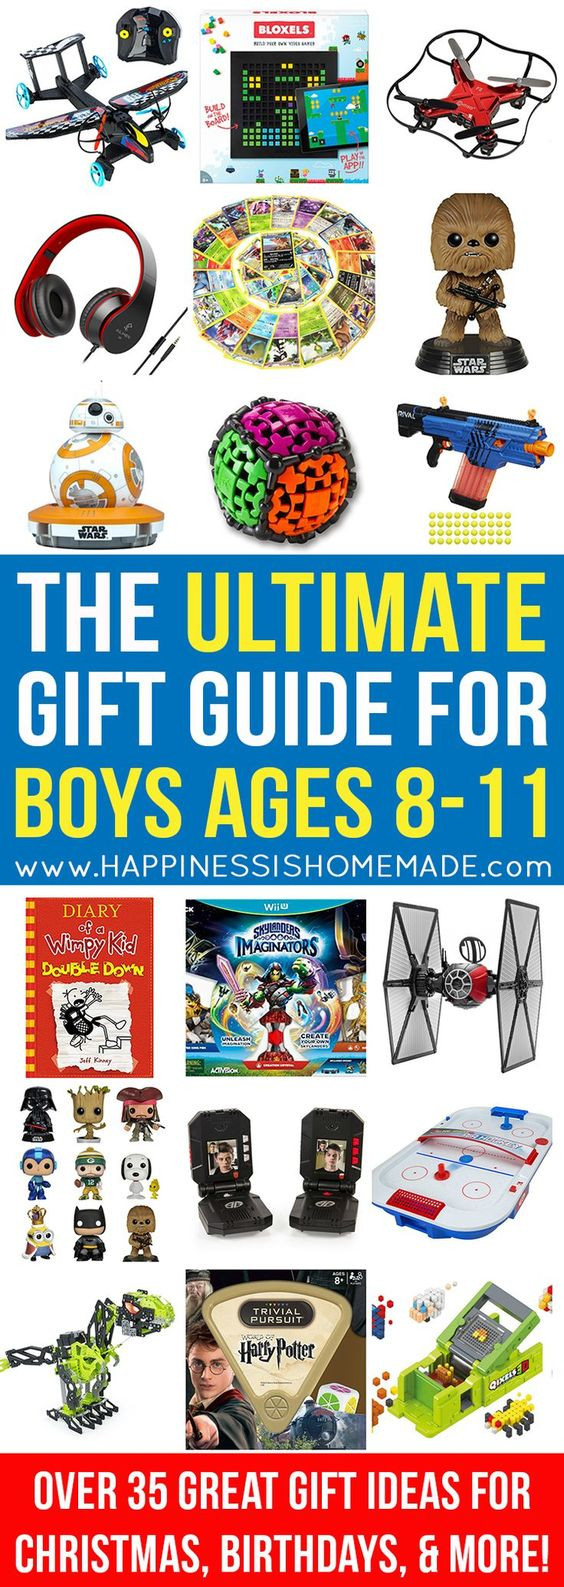 Gift Ideas For Boys Age 10
 The Best Gift Ideas for Boys Ages 8 11